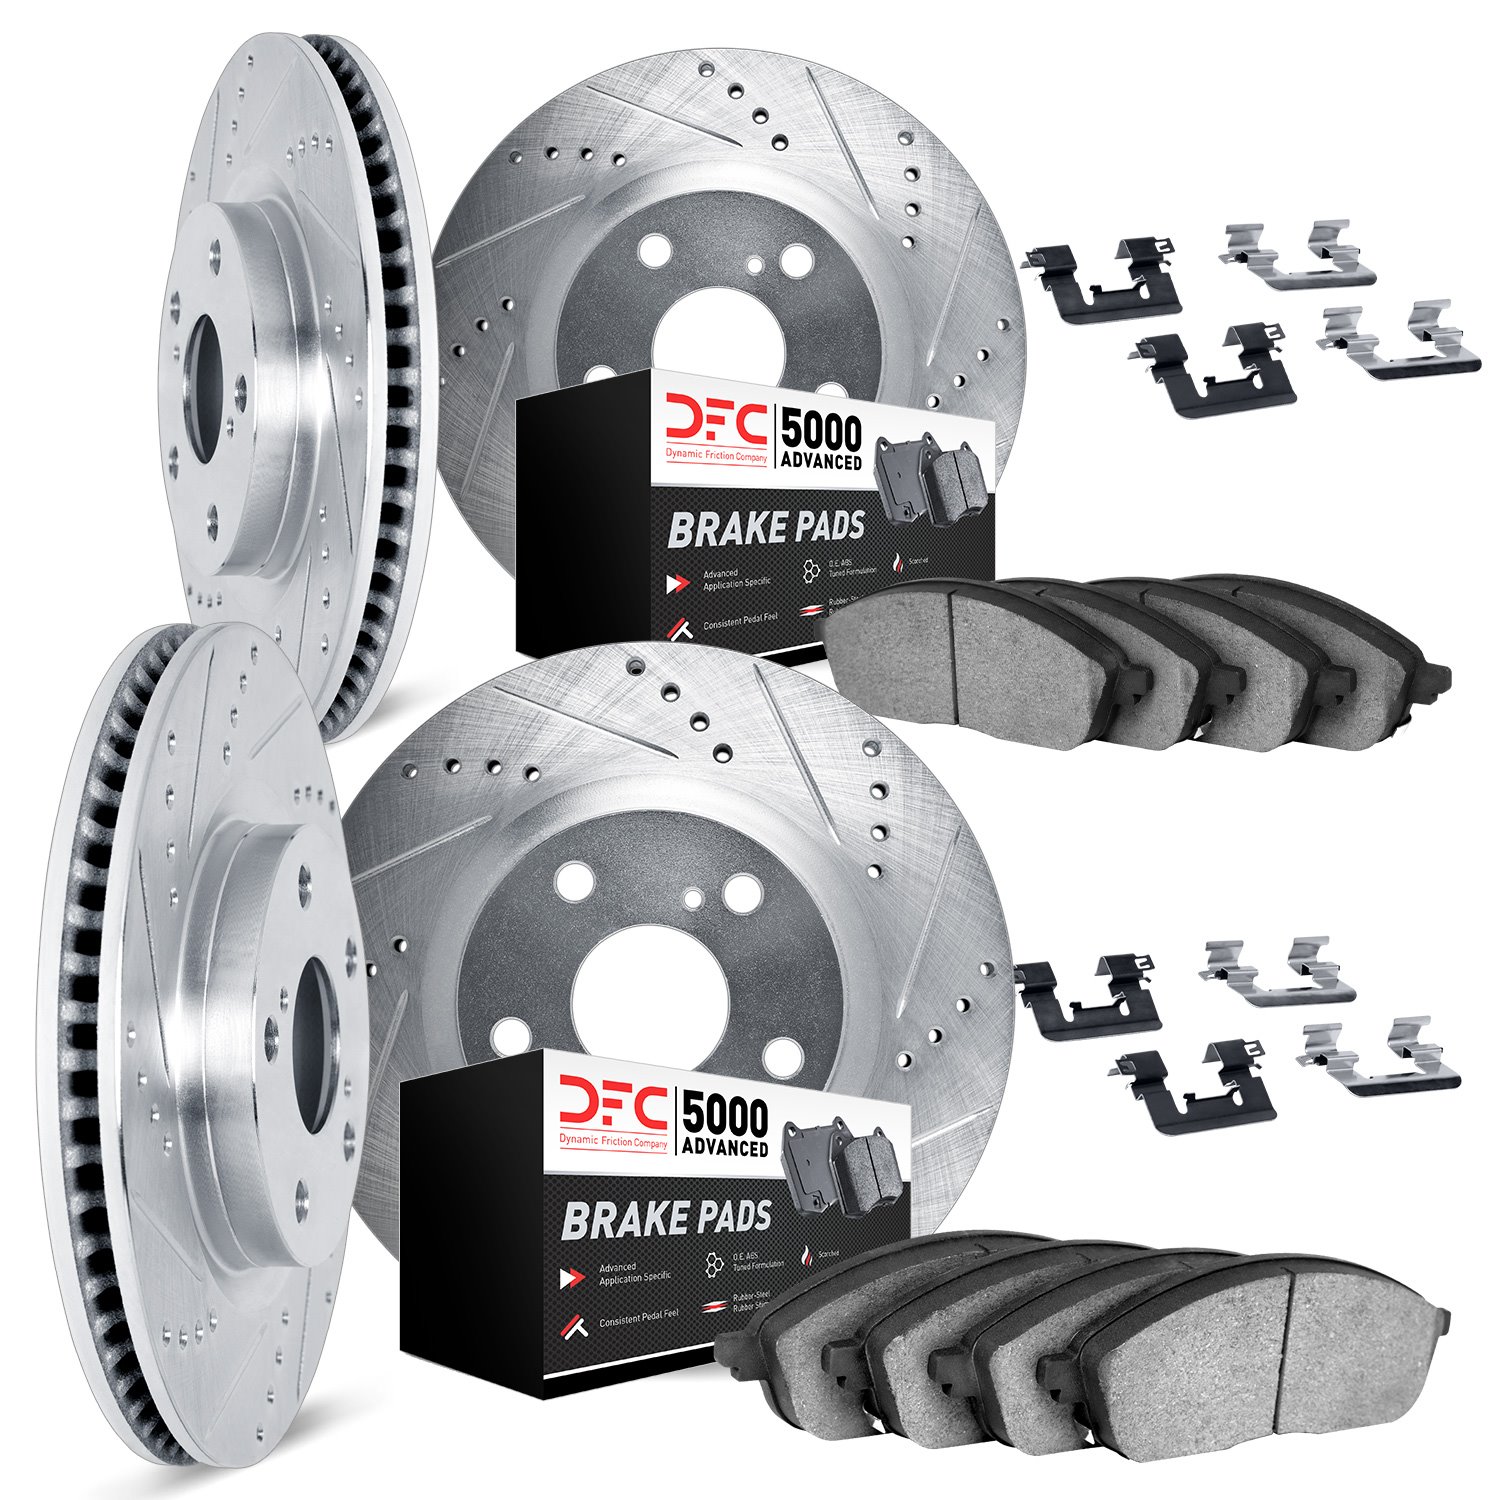 7514-02029 Drilled/Slotted Brake Rotors w/5000 Advanced Brake Pads Kit & Hardware [Silver], 2014-2019 Porsche, Position: Front a